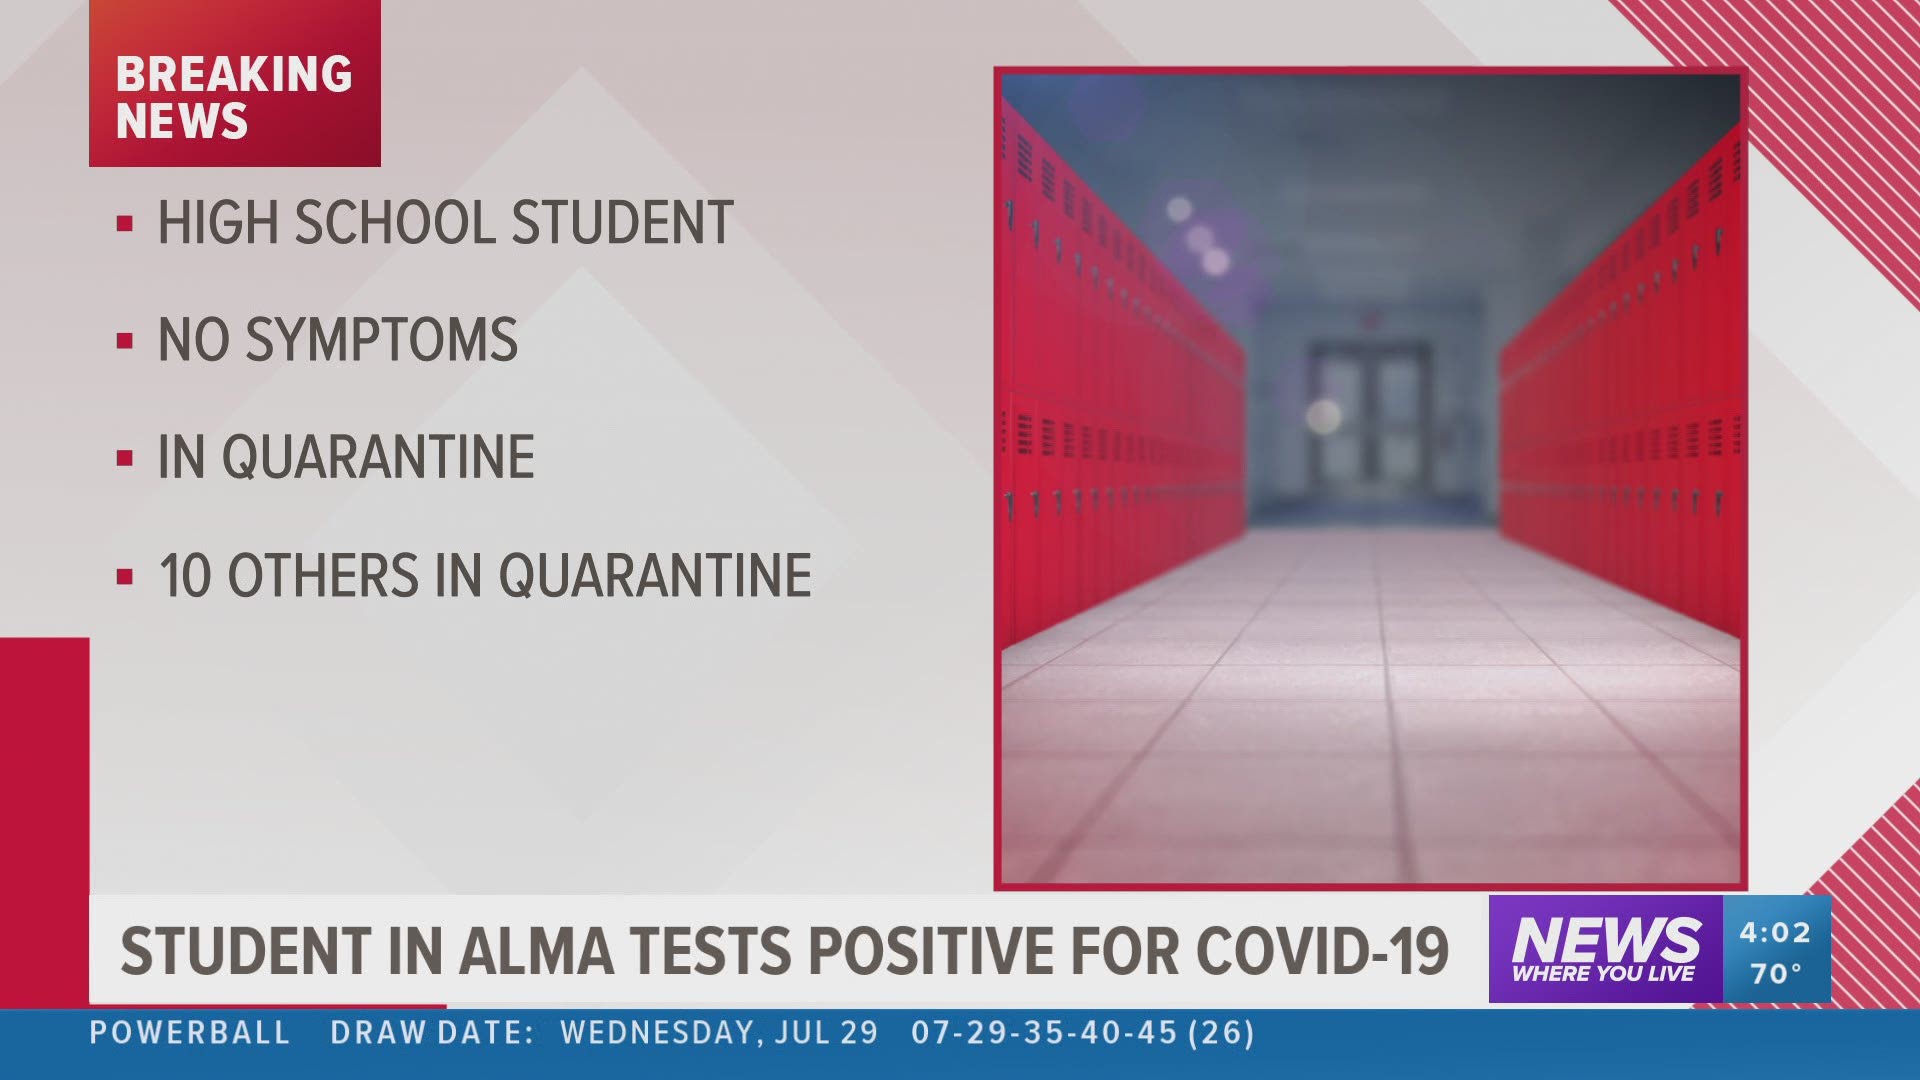 Student in Alma tests positive for COVID-19.